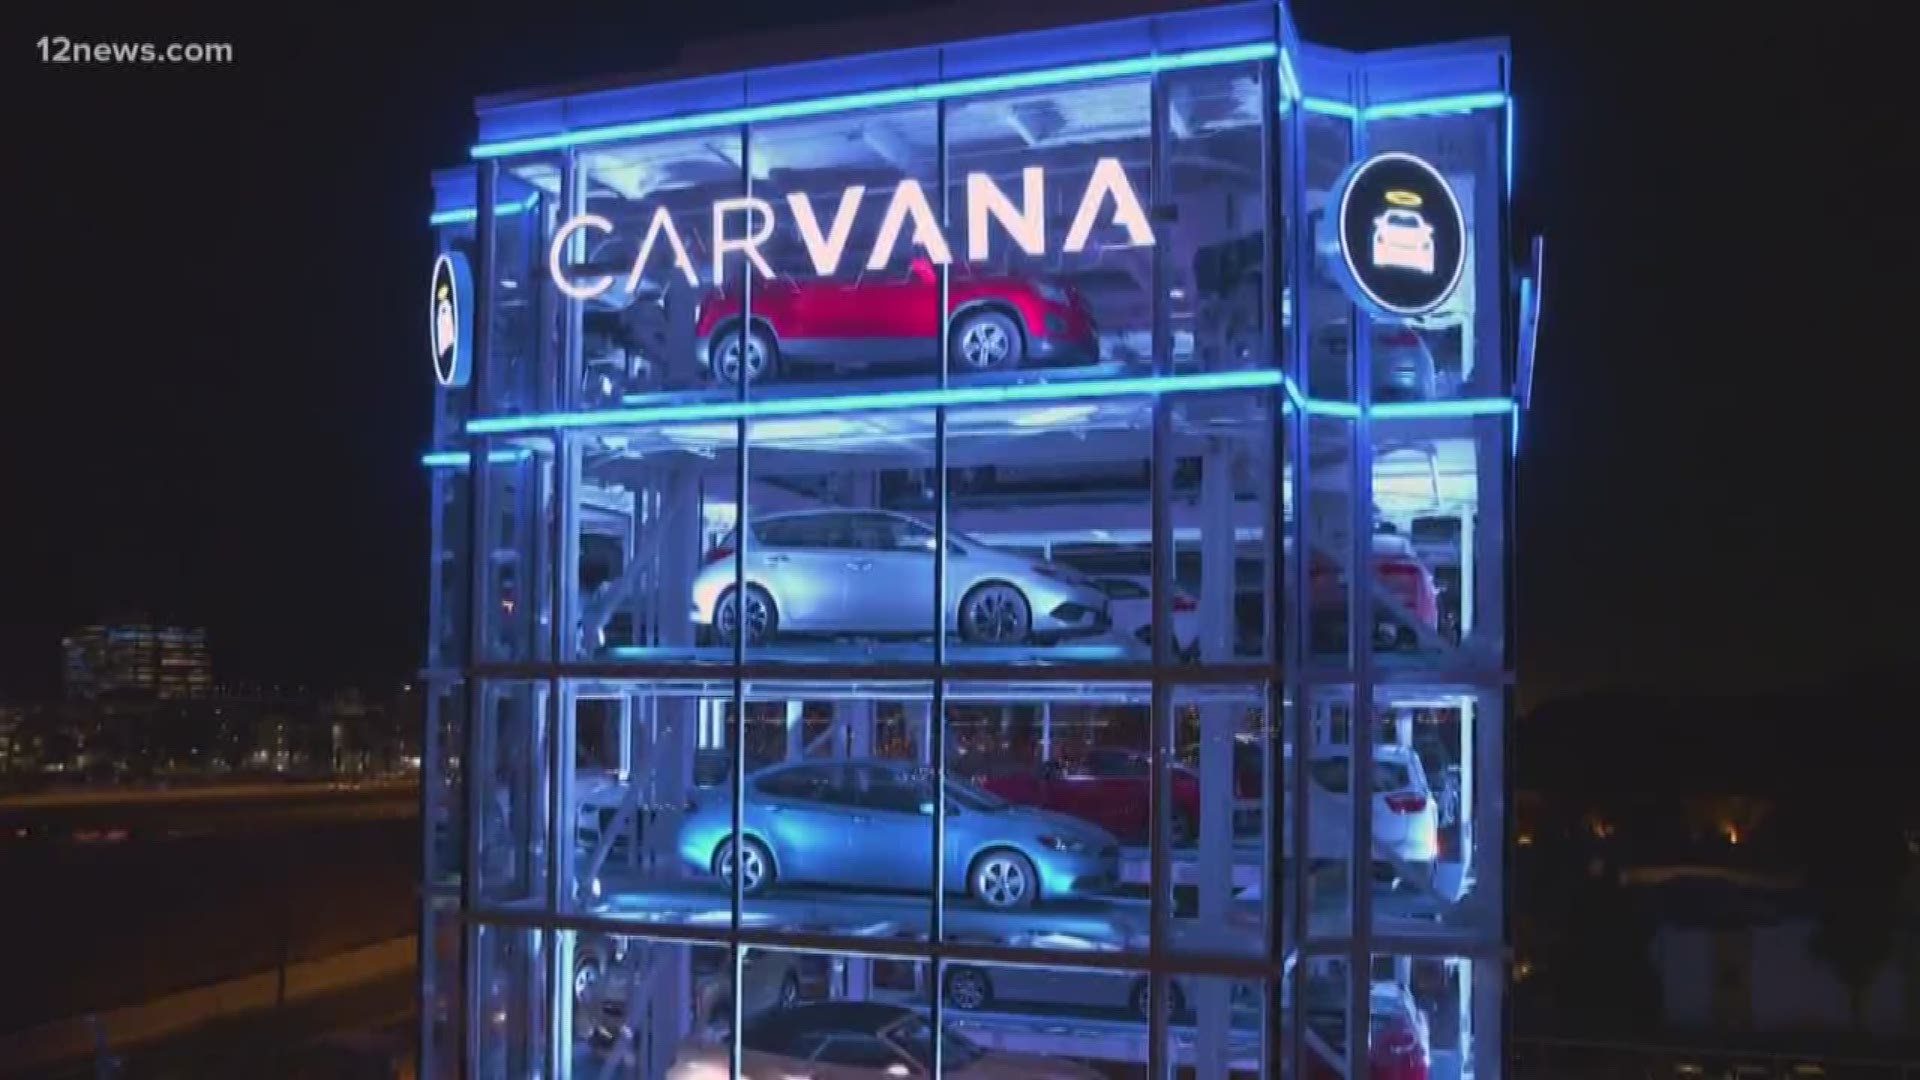 Carvana has built a 90 foot vending machine that dispenses cars. Check out how it works!